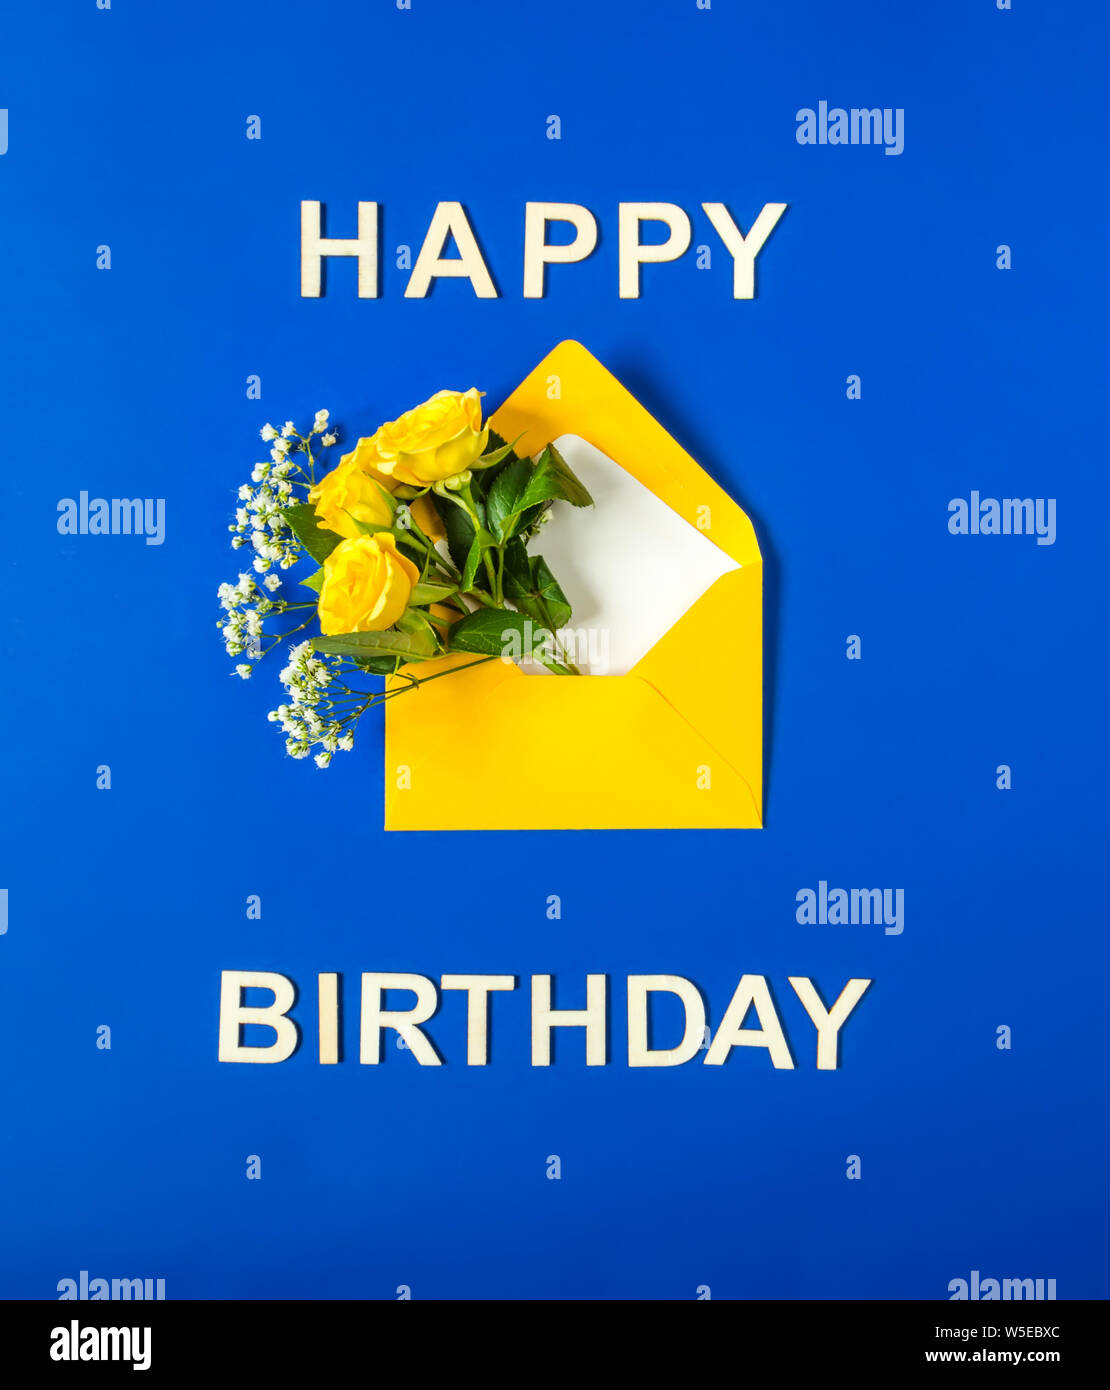 Yellow Roses And White Gypsophila In Envelope Close Up On Blue Background Text Happy Birthday Wooden Letters Top View Flat Lay Template For Birth Stock Photo Alamy